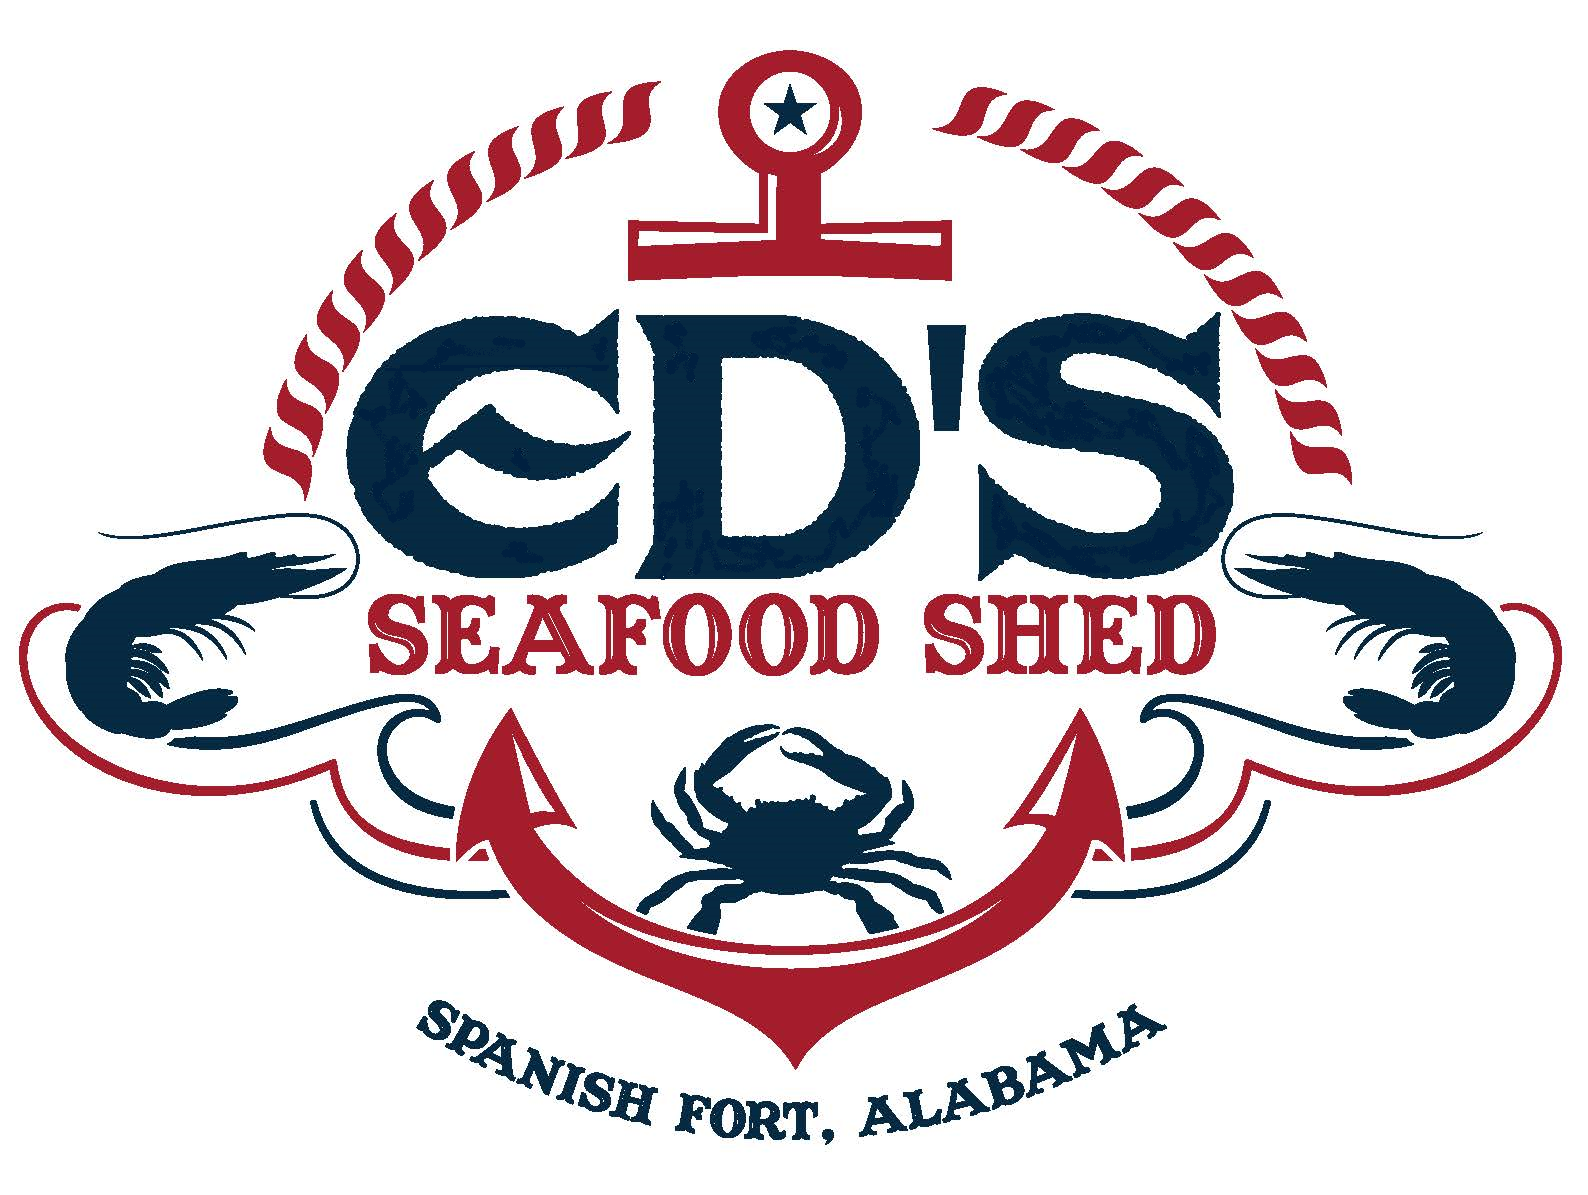 ED'S Seafood SHED logo Blue & Red.png